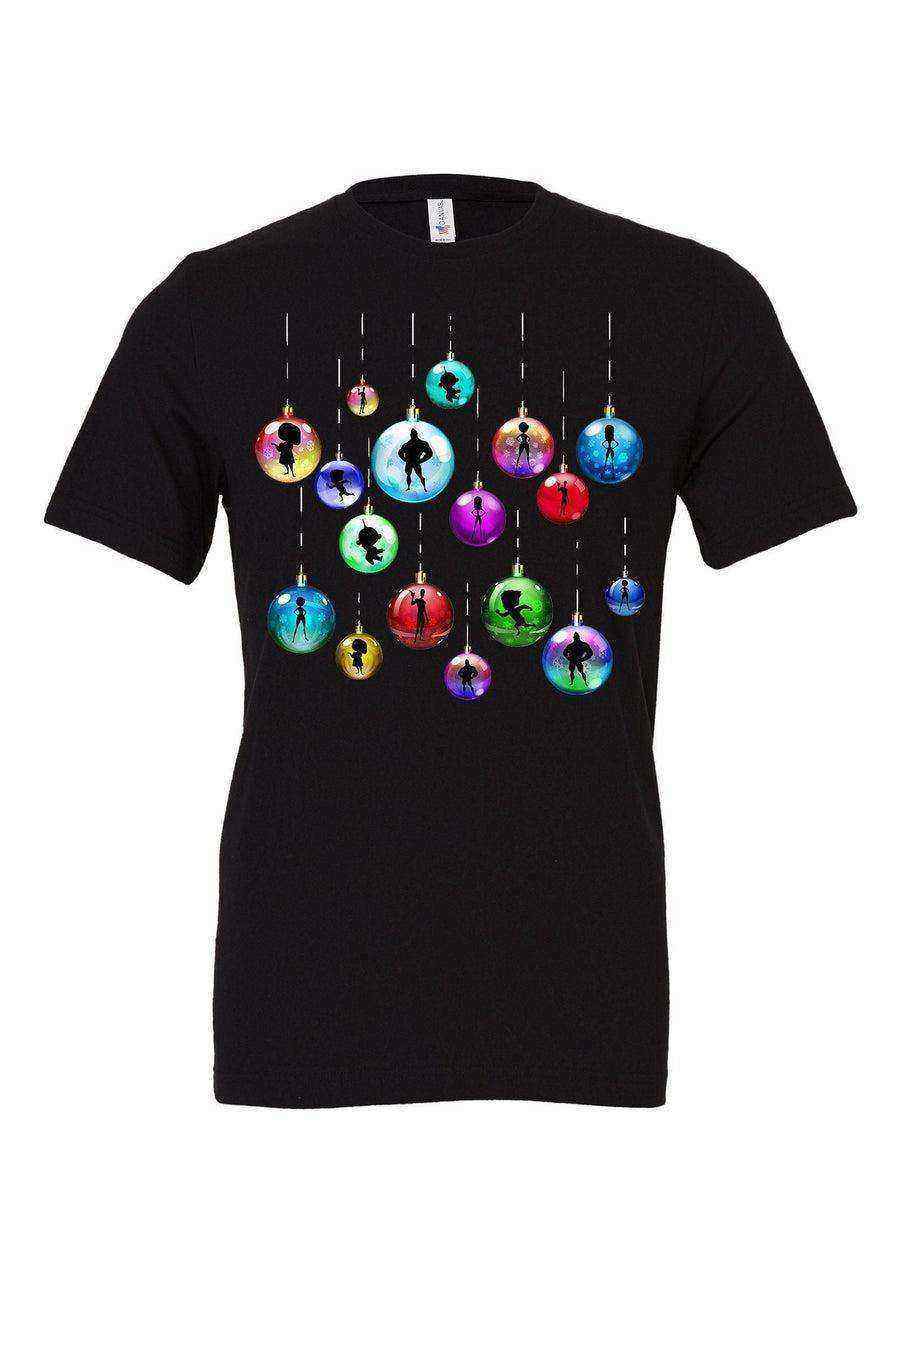 Incredibles Ornaments Shirt | Christmas In - Dylan's Tees